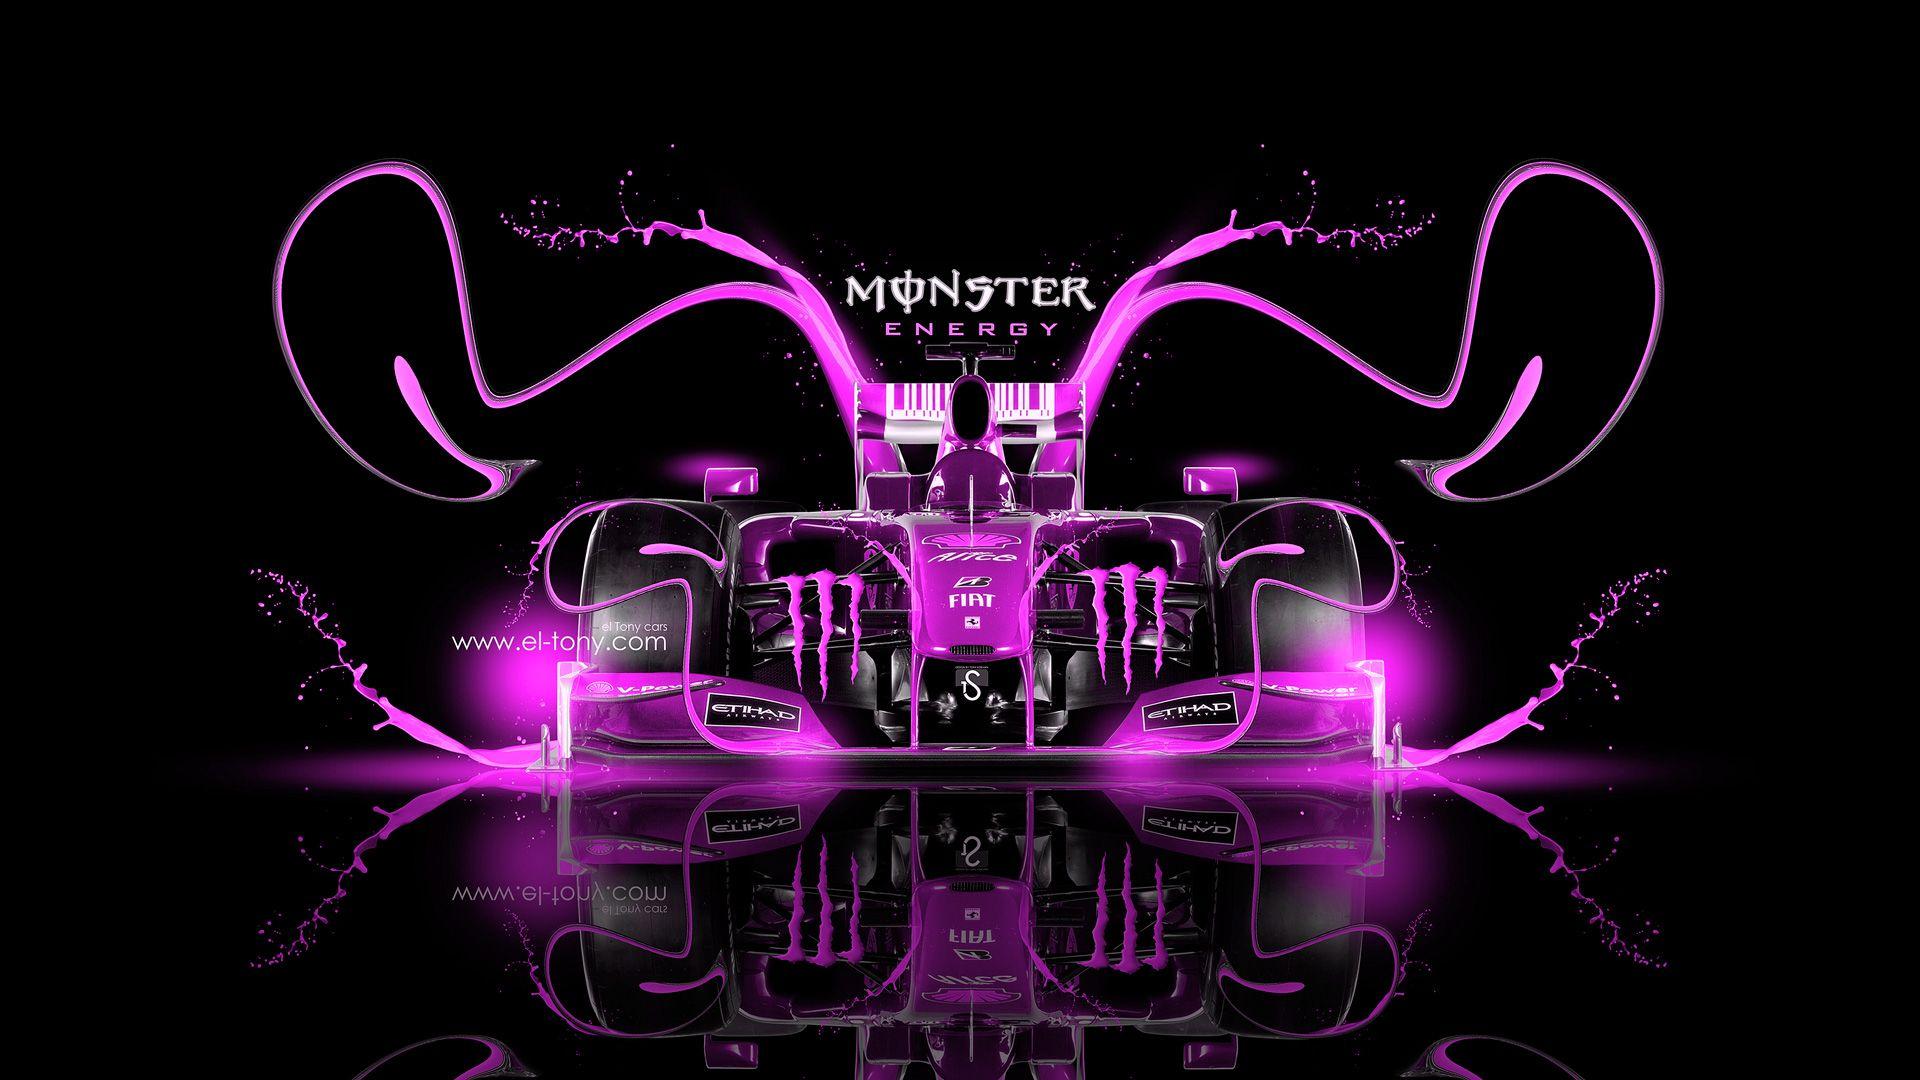 Pink Monster Logo - Monster Energy Wallpapers, Pictures, Images